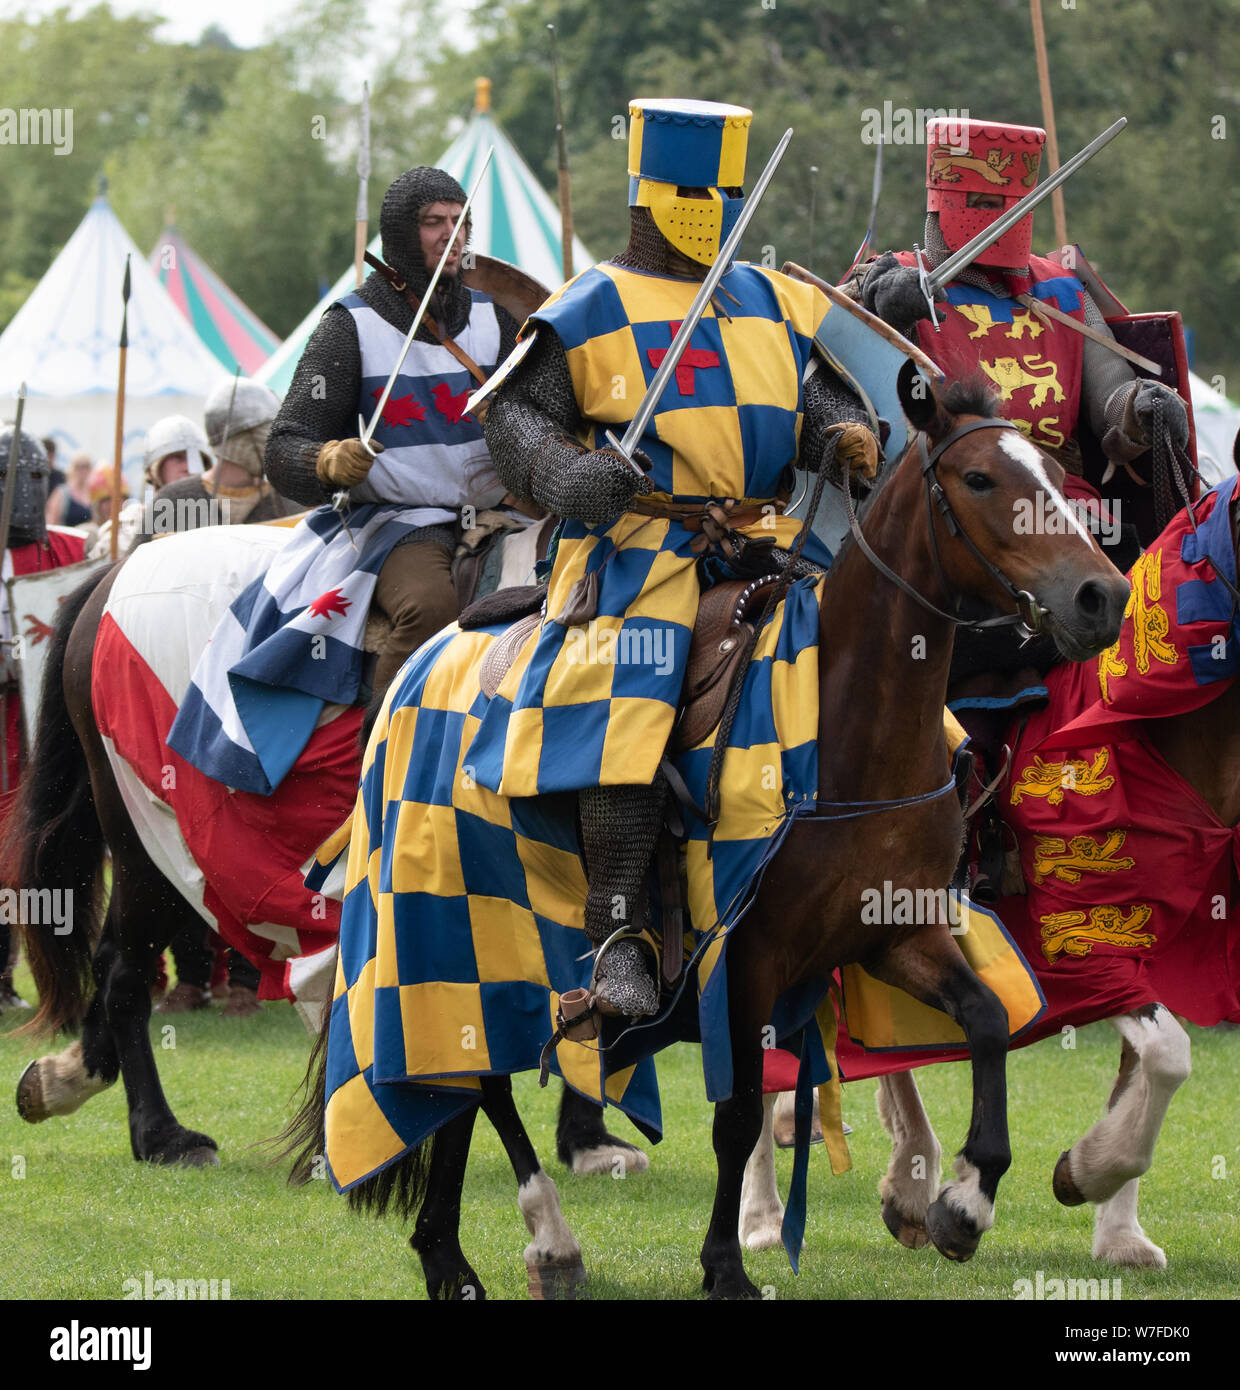 Reenactors recreate the 1265 Battle Of Evesham where Simon De Montfort and his army were defeated by the Royal army. Stock Photo